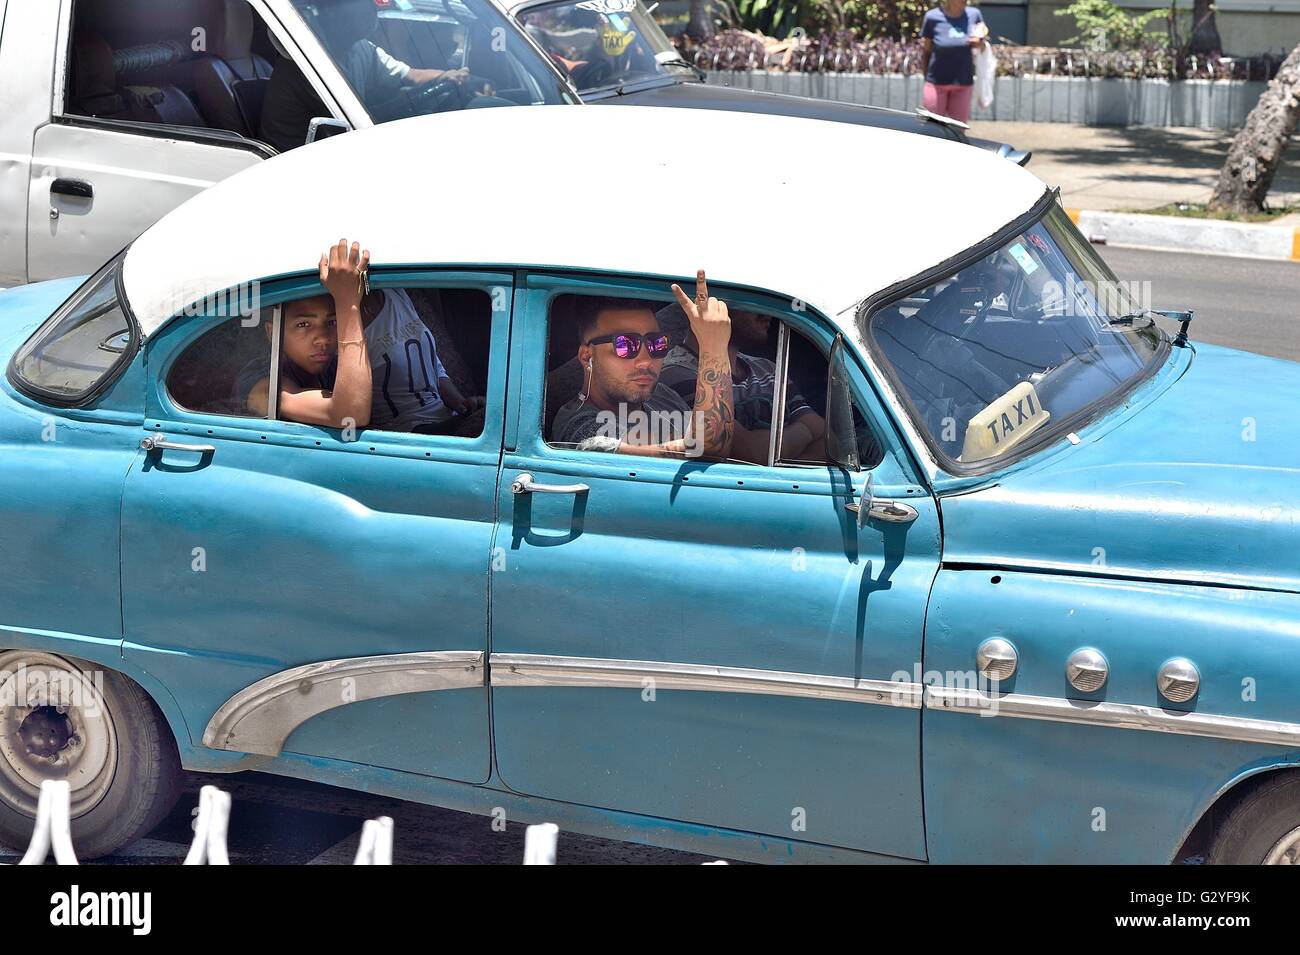 May 14, 2016 - Havana, Havana, Cuba - Passengers in a Cuban version of ''ride sharing'' in a vintage car in Havana. The Economic reality of the effects of the 56 year American Economic Blockage of Cuba is reflected in the historic building facades, antique automobiles, and the dilapidated living conditions of the Cuban people, Havana, Cuba, May 2016...The United States imposed a commercial, economic, and financial blockade against Cuba on Oct. 19,1960 (in Cuba called el bloqueo, Ã’the blockadeÃ“). A blockade is economic warfare as defined by the Oxford Dictionary. The Cuban blockade is the mos Stock Photo